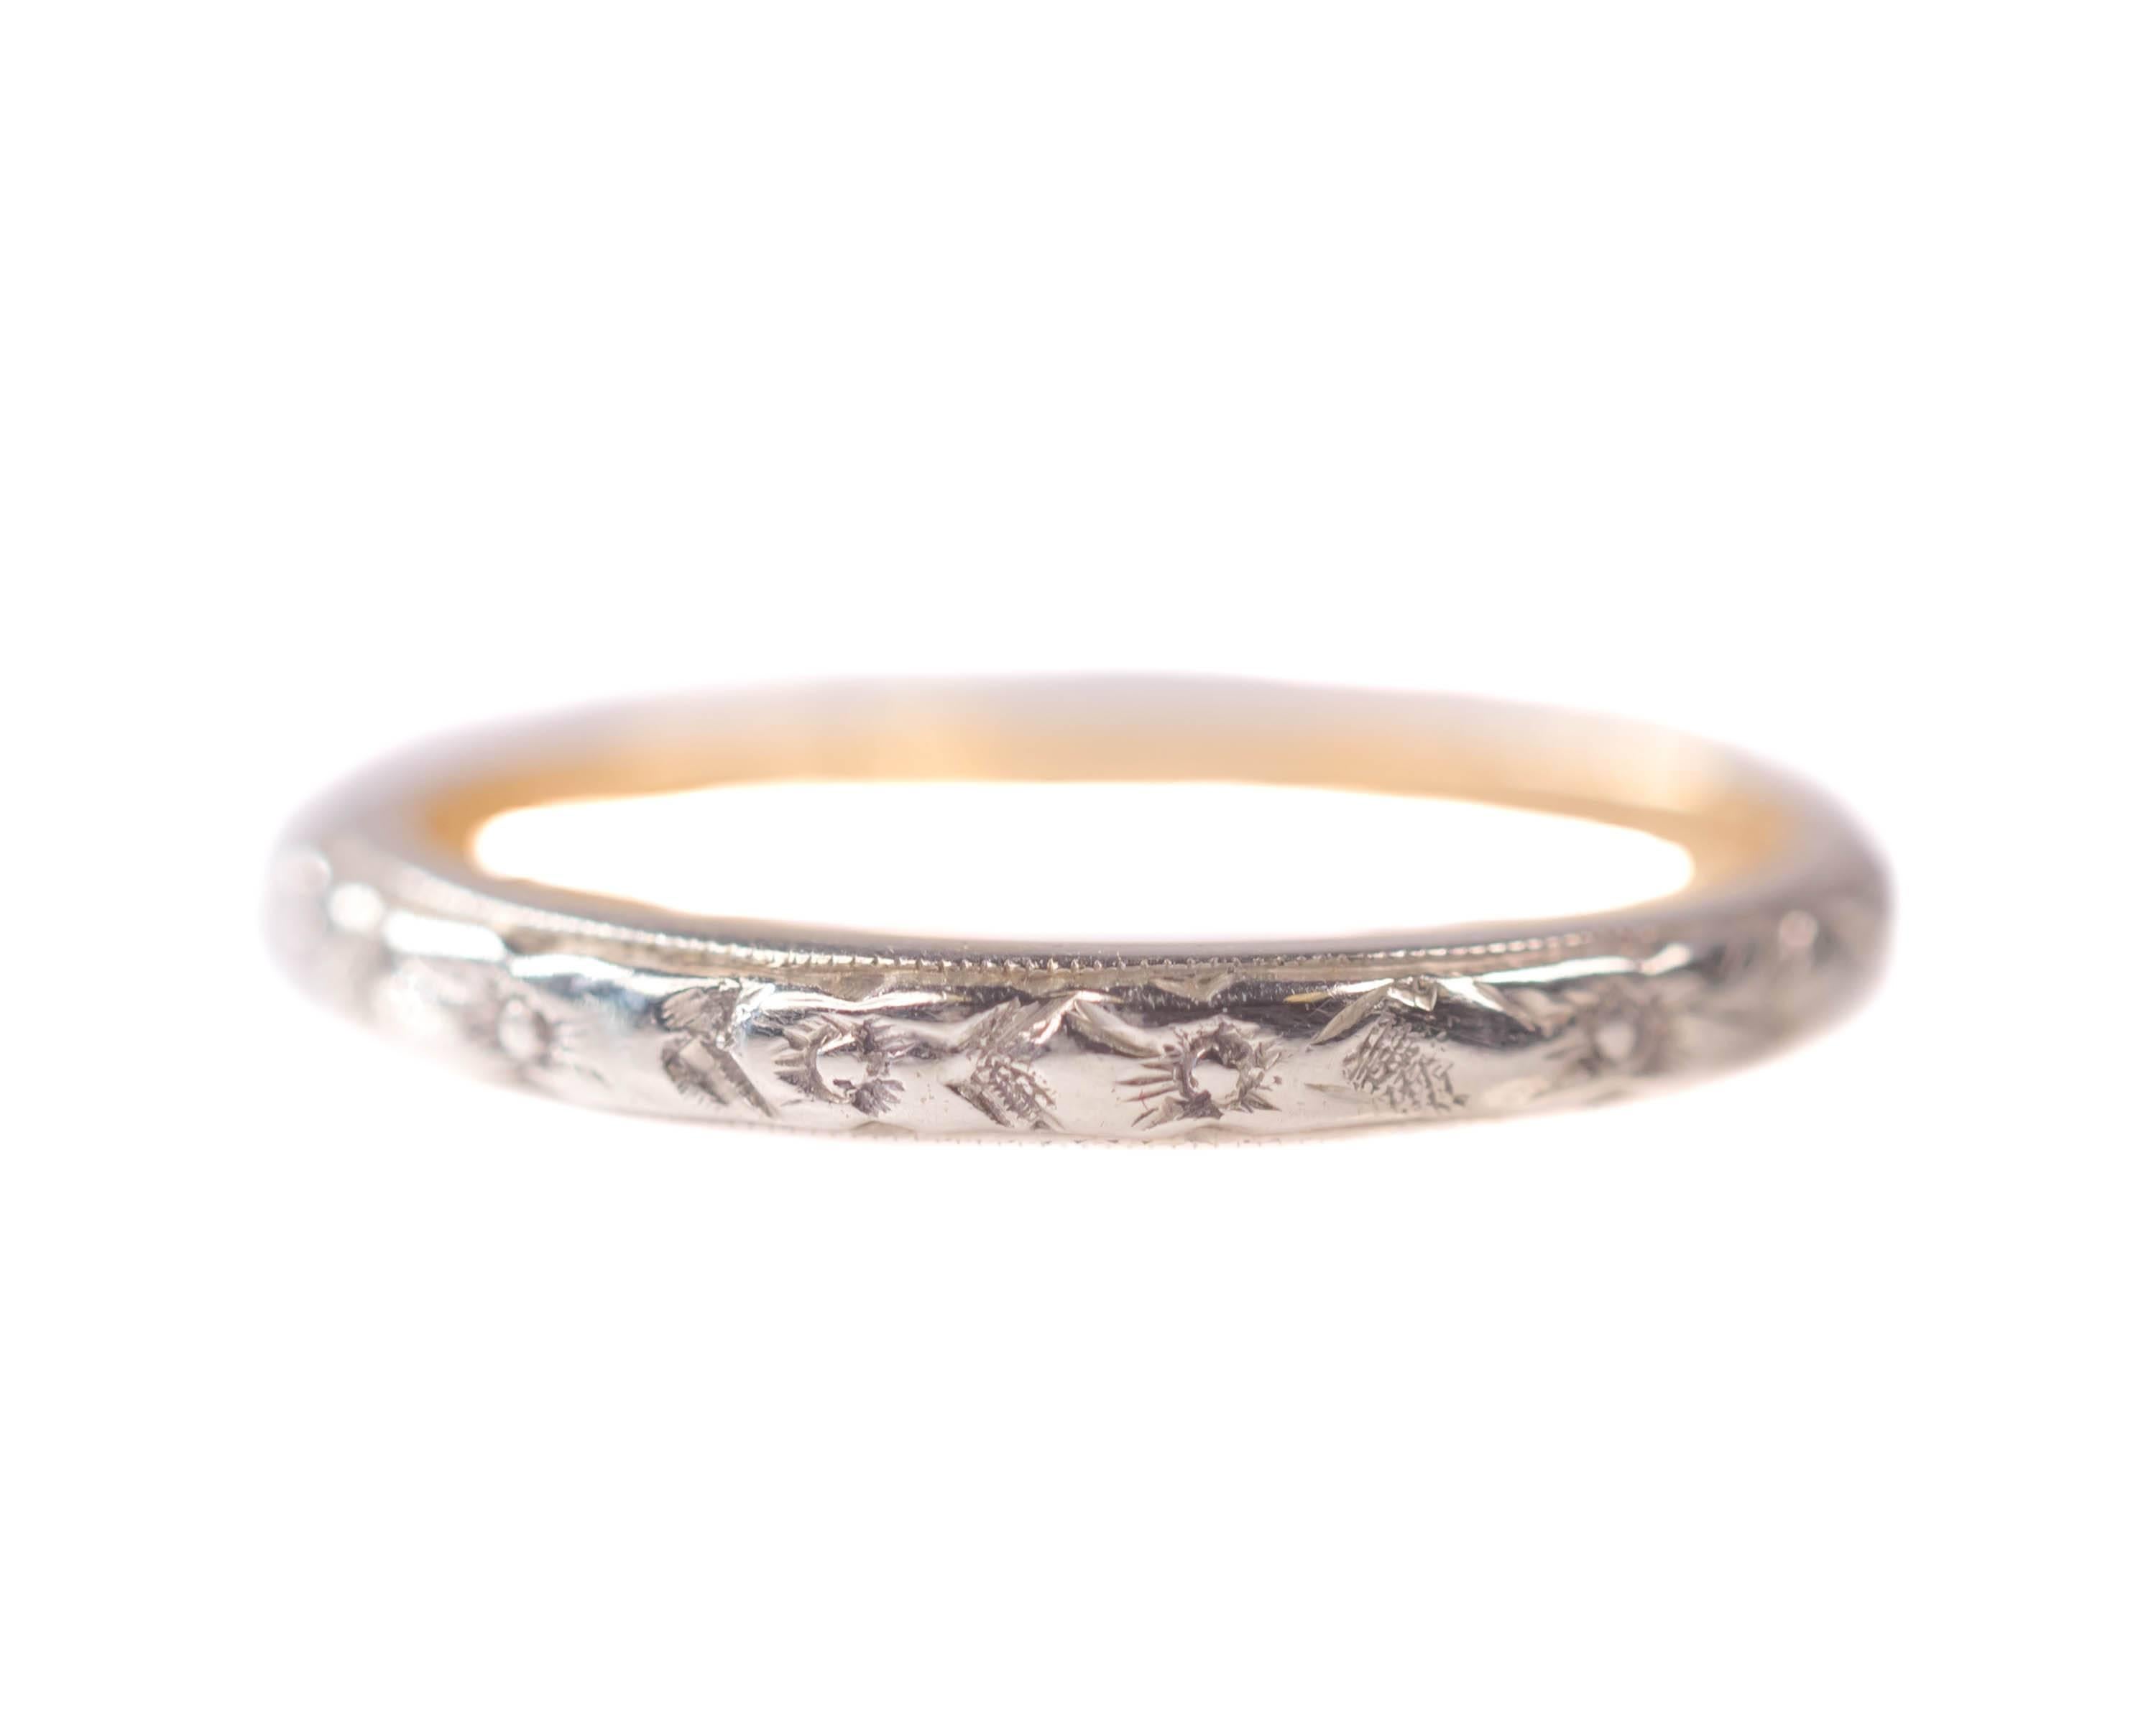 1920s Art Deco Floral Pattern Band - 18 Karat White Gold, Yellow Gold

Features an 18K White Gold outer shank and an 18K Yellow Gold inner shank. The face of the ring is etched with a delicate floral pattern. The upper and lower edges are